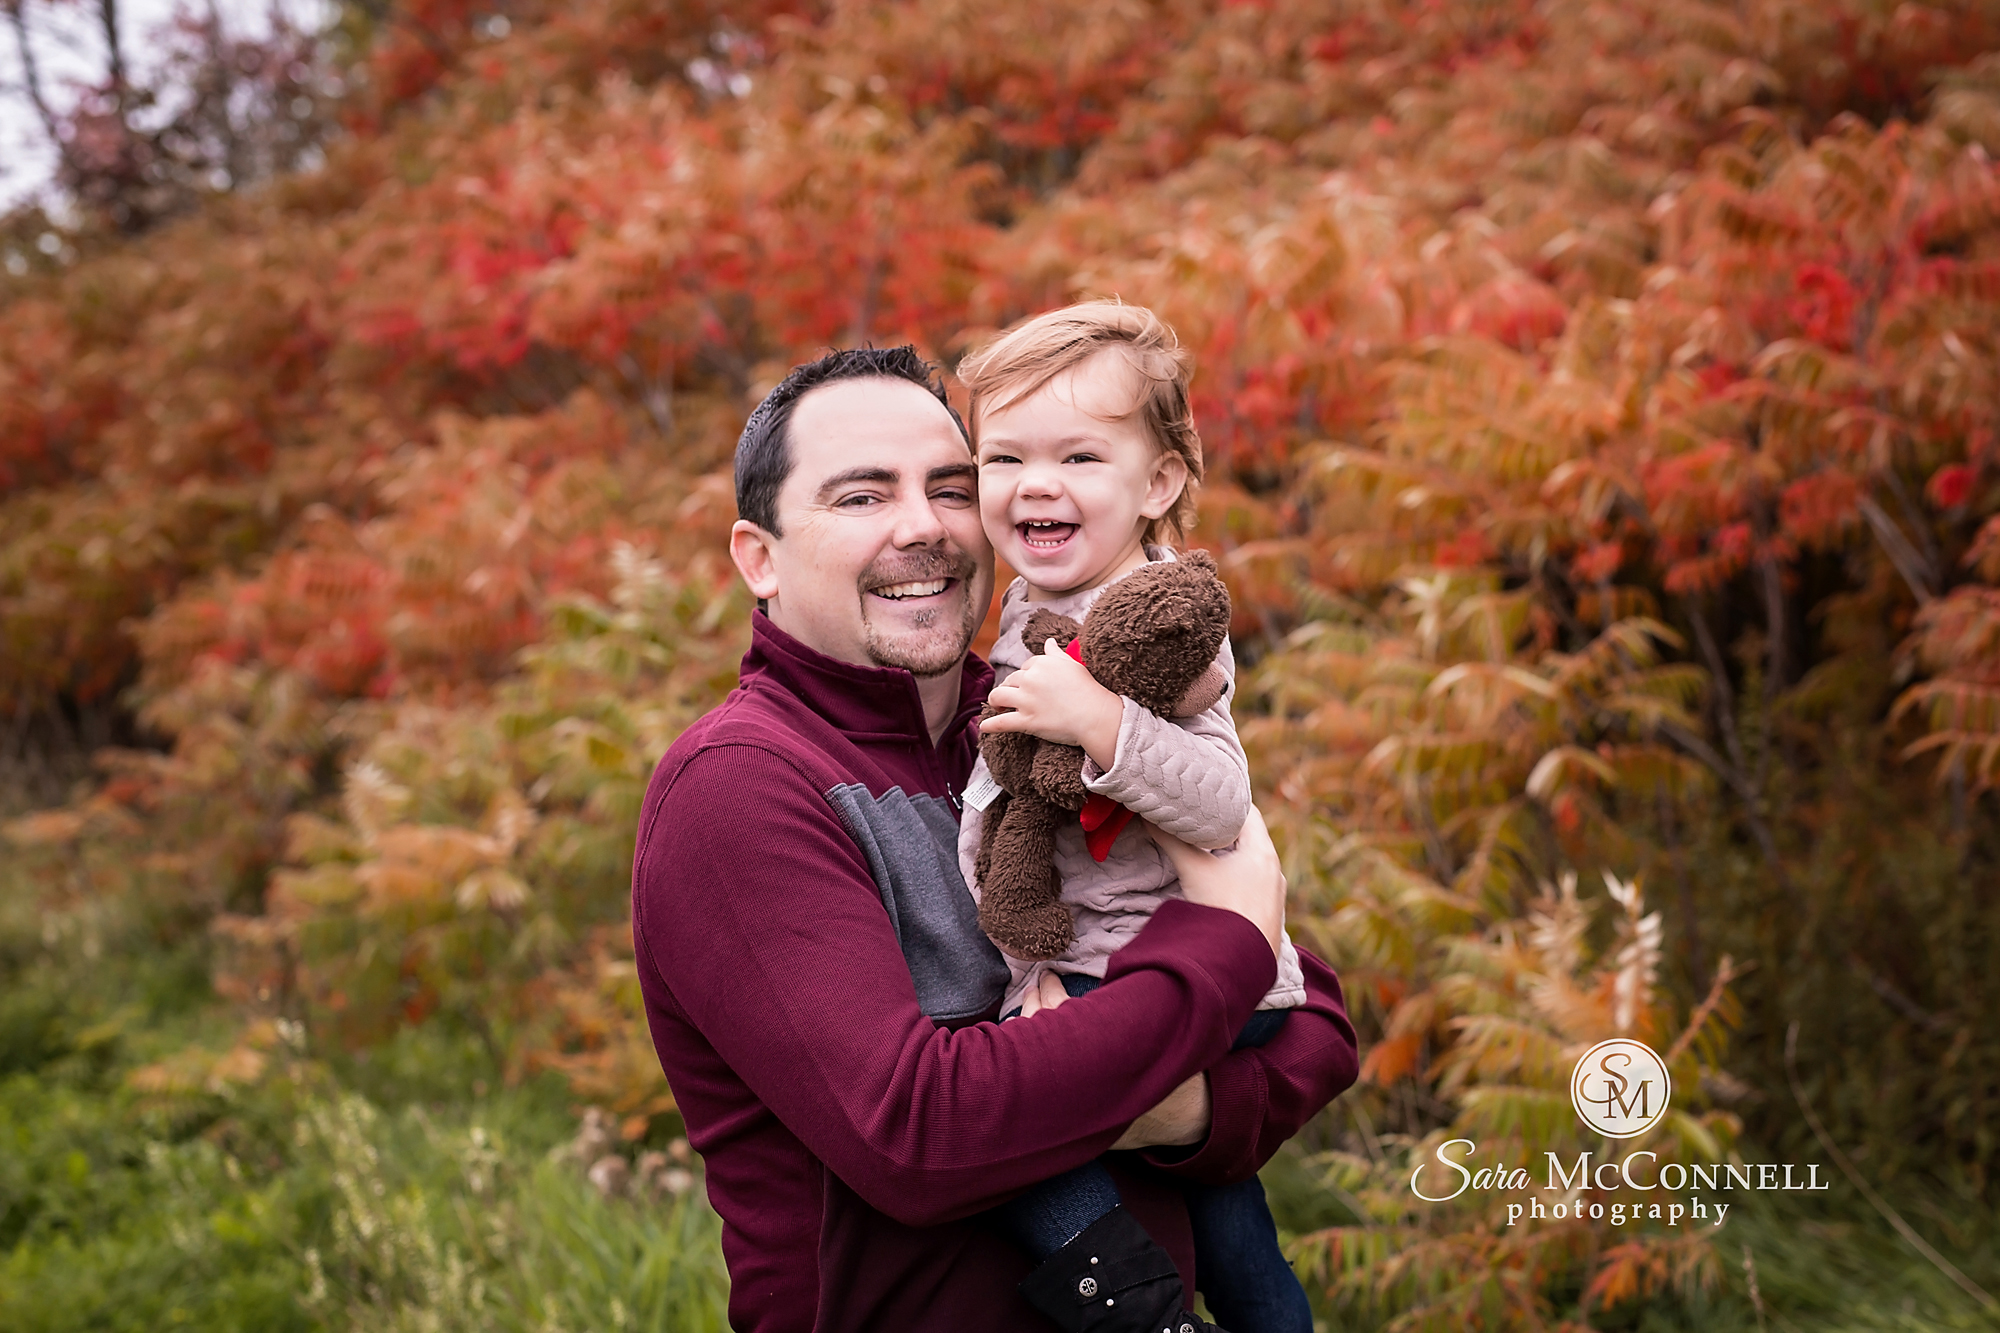 Ottawa Family Photographer | This photo is a favourite for a special reason